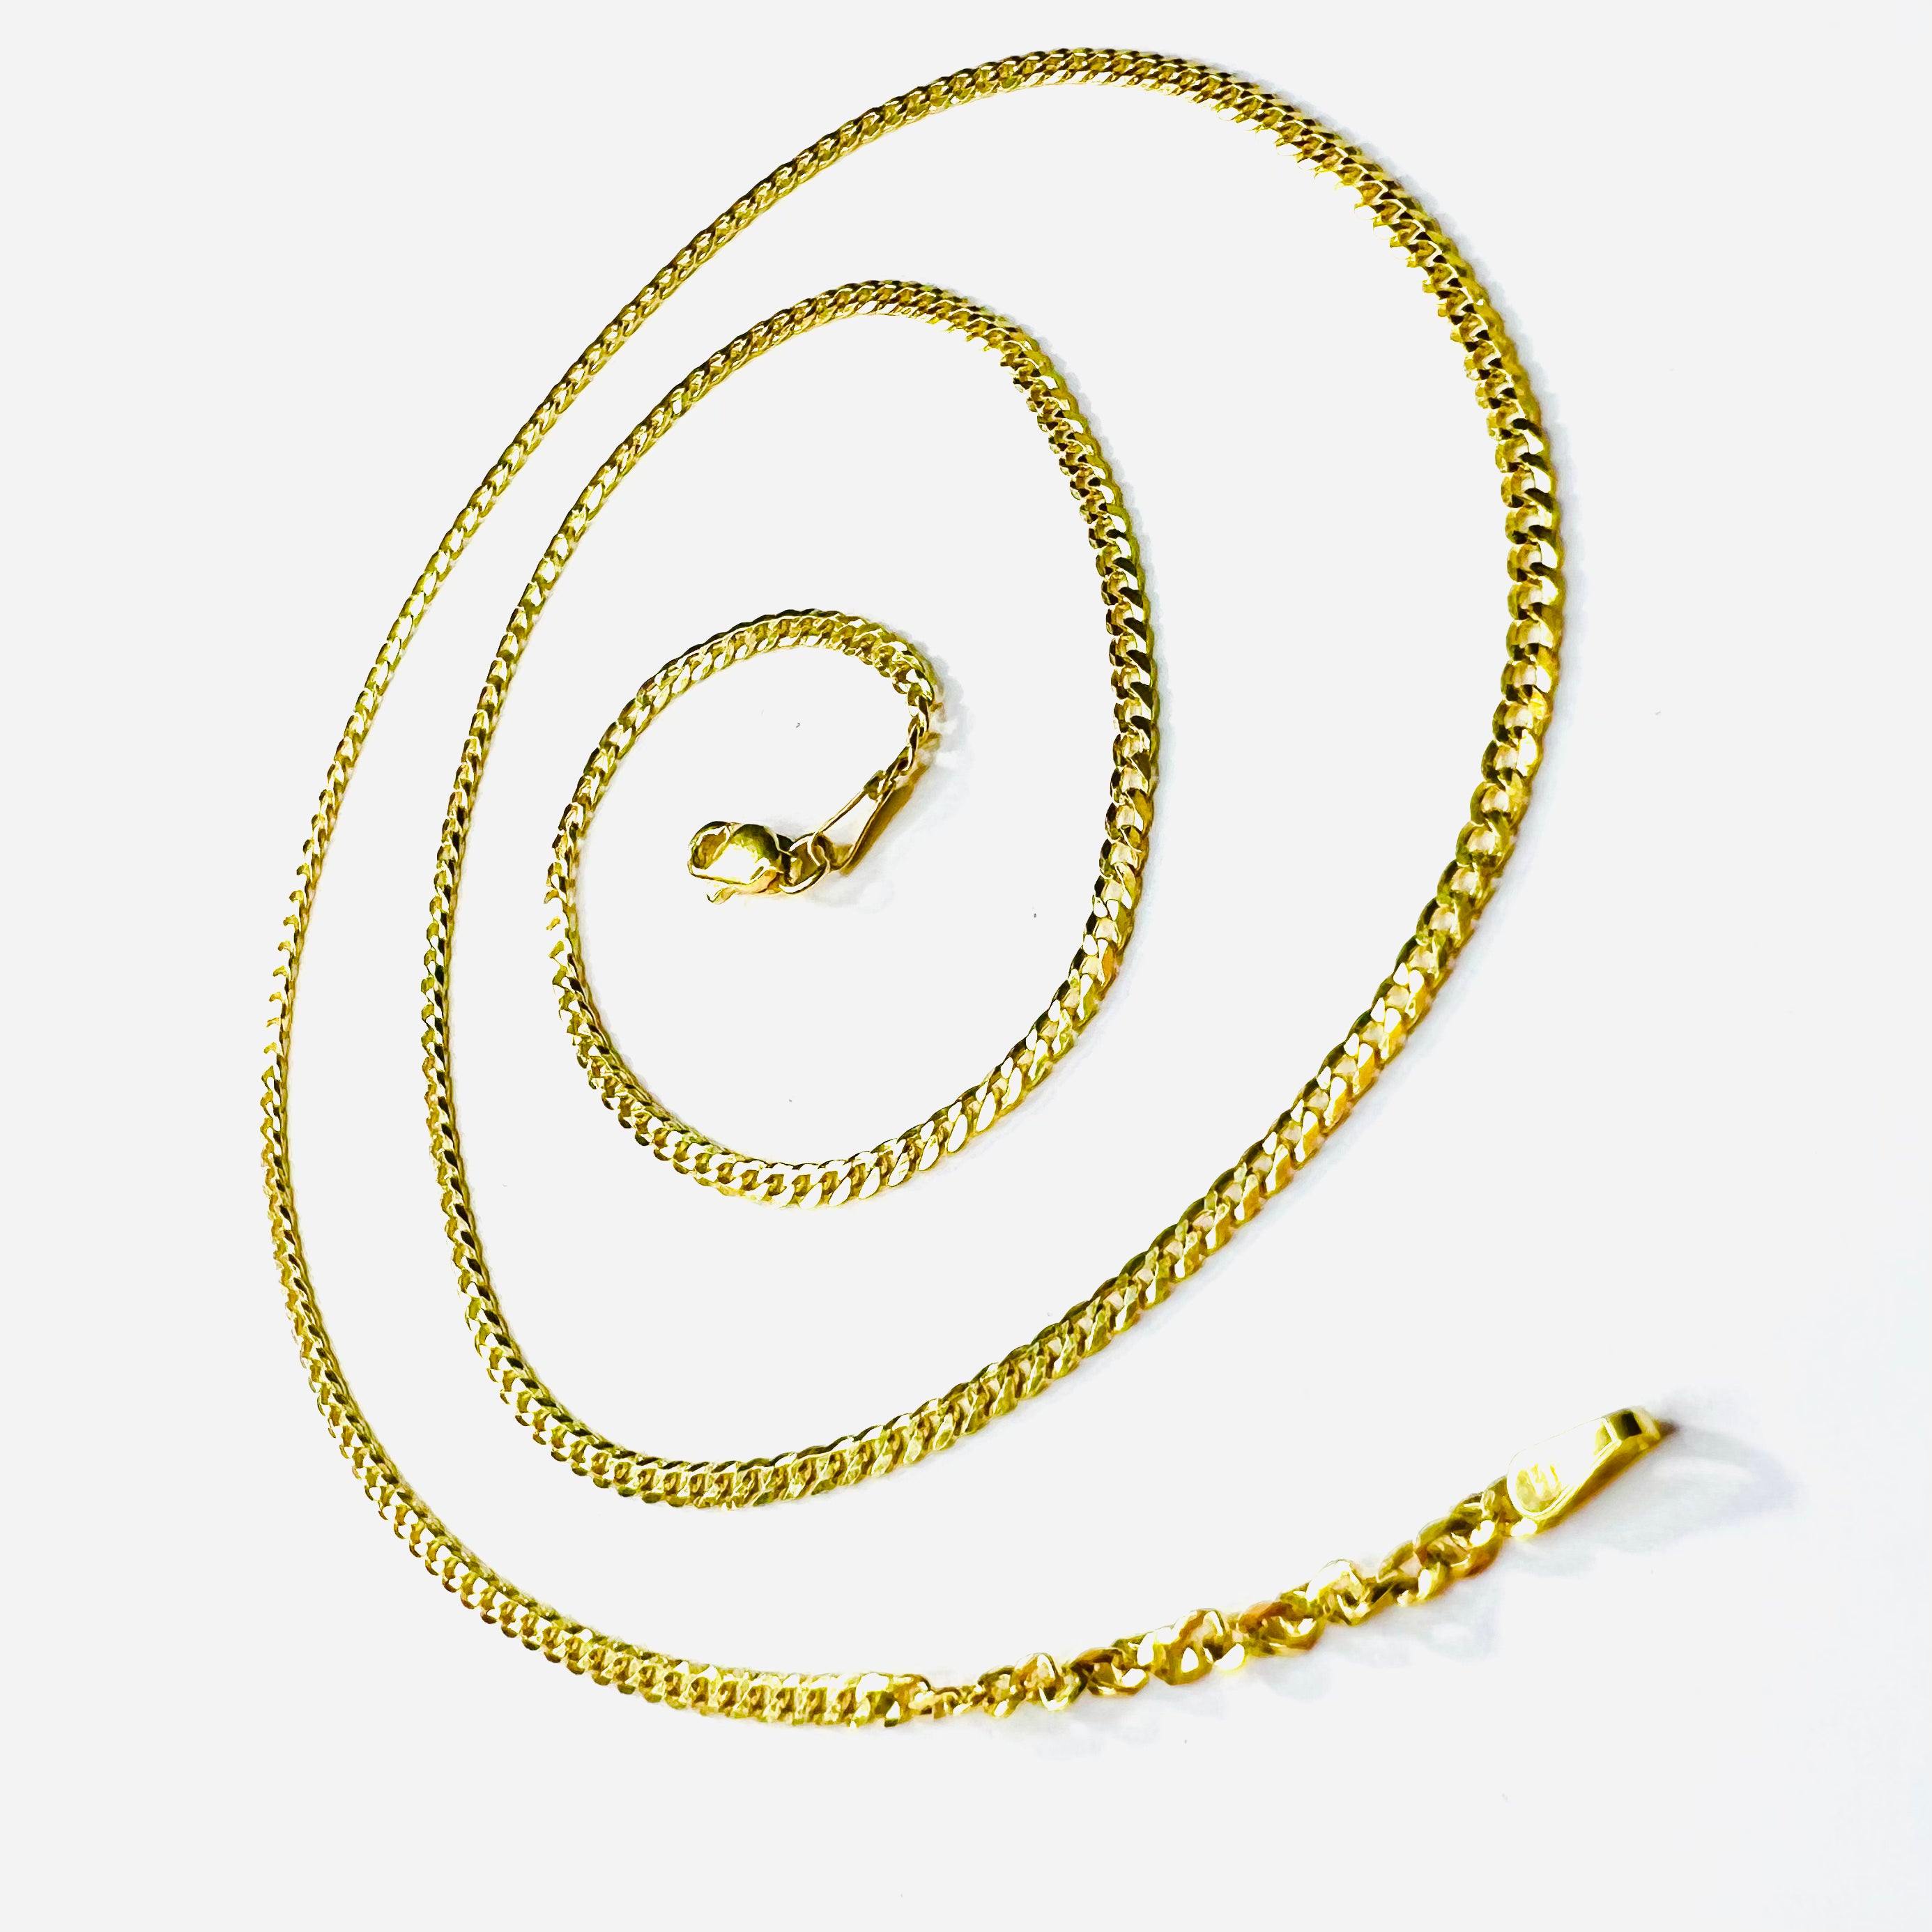 20" 2mm 14K Yellow Gold Cuban Link Chain Necklace